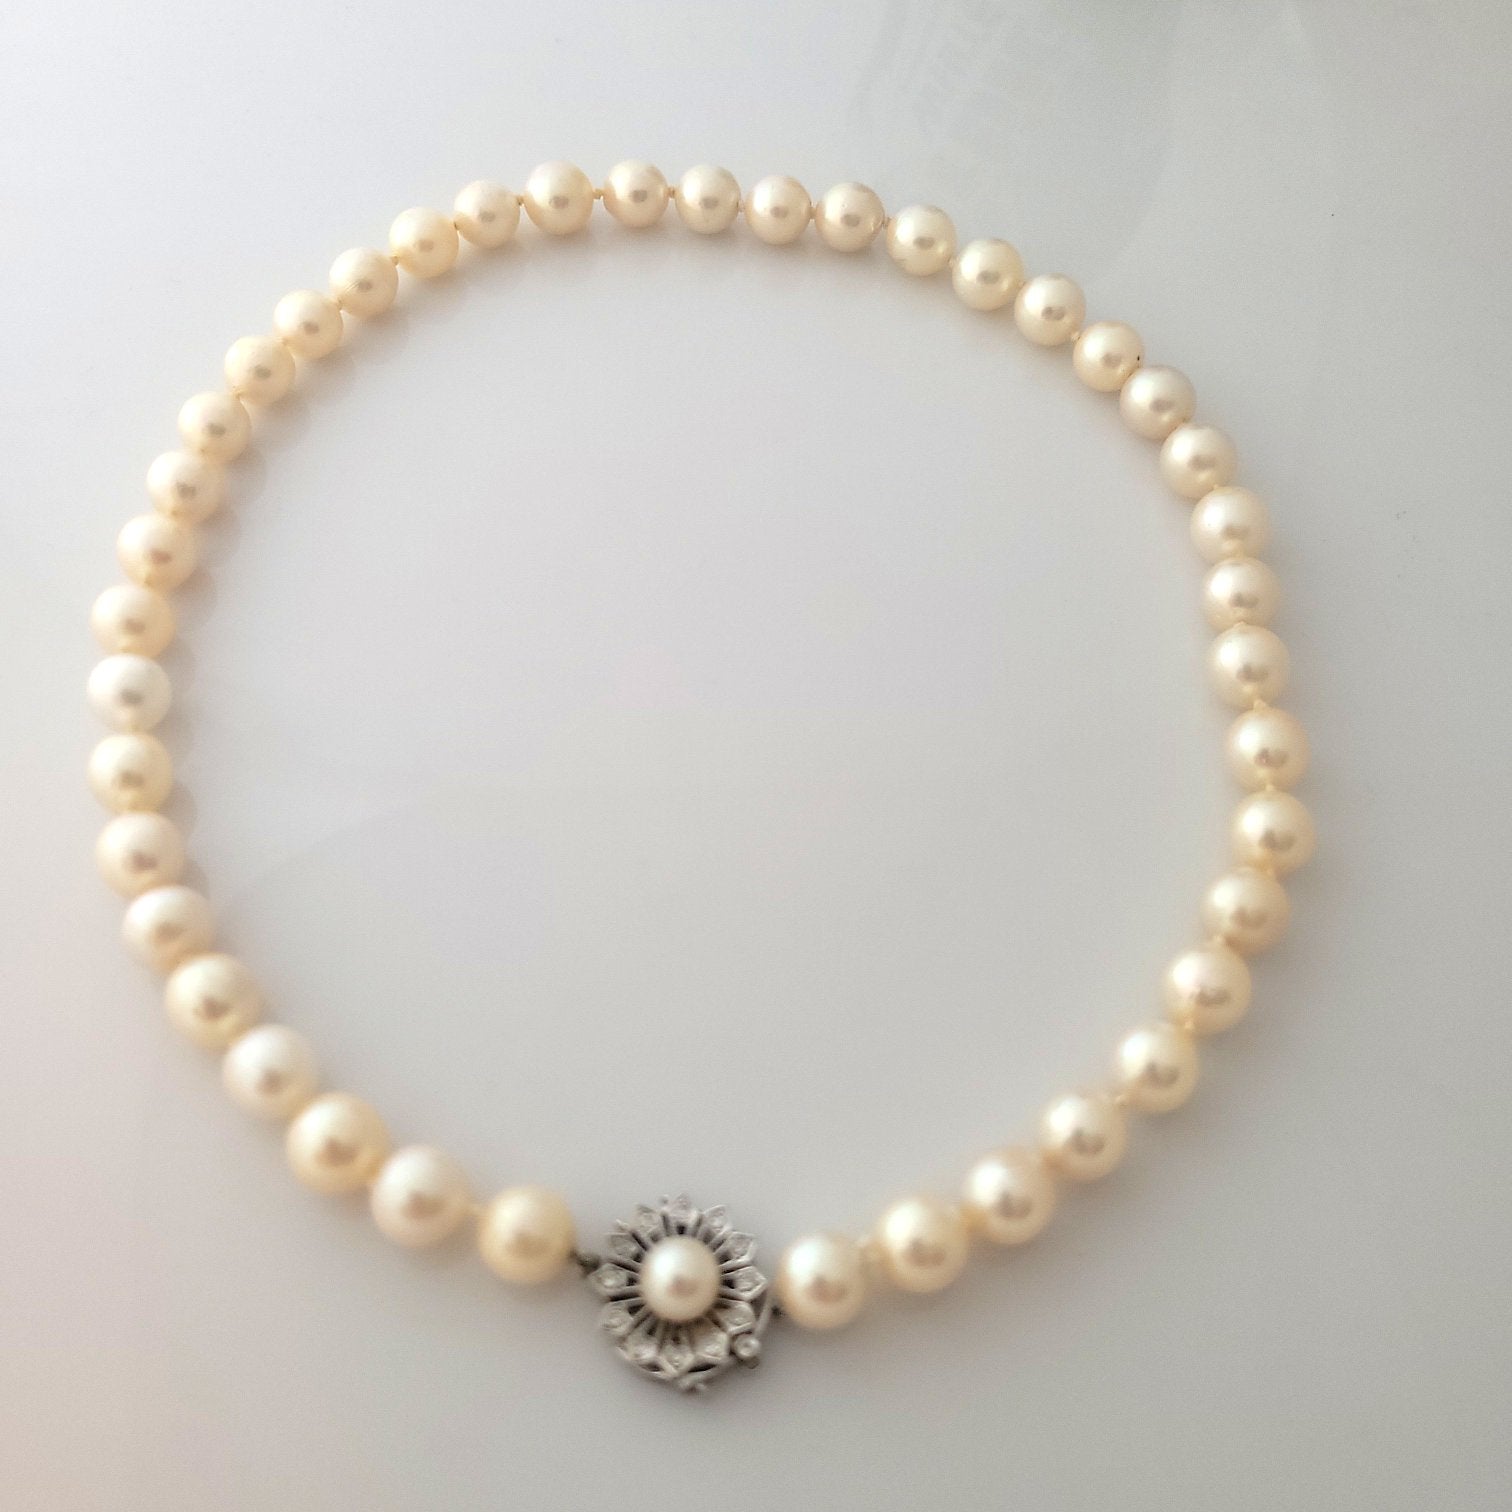 Sold at Auction: Three-strand pearl necklace with emerald and diamond clasp